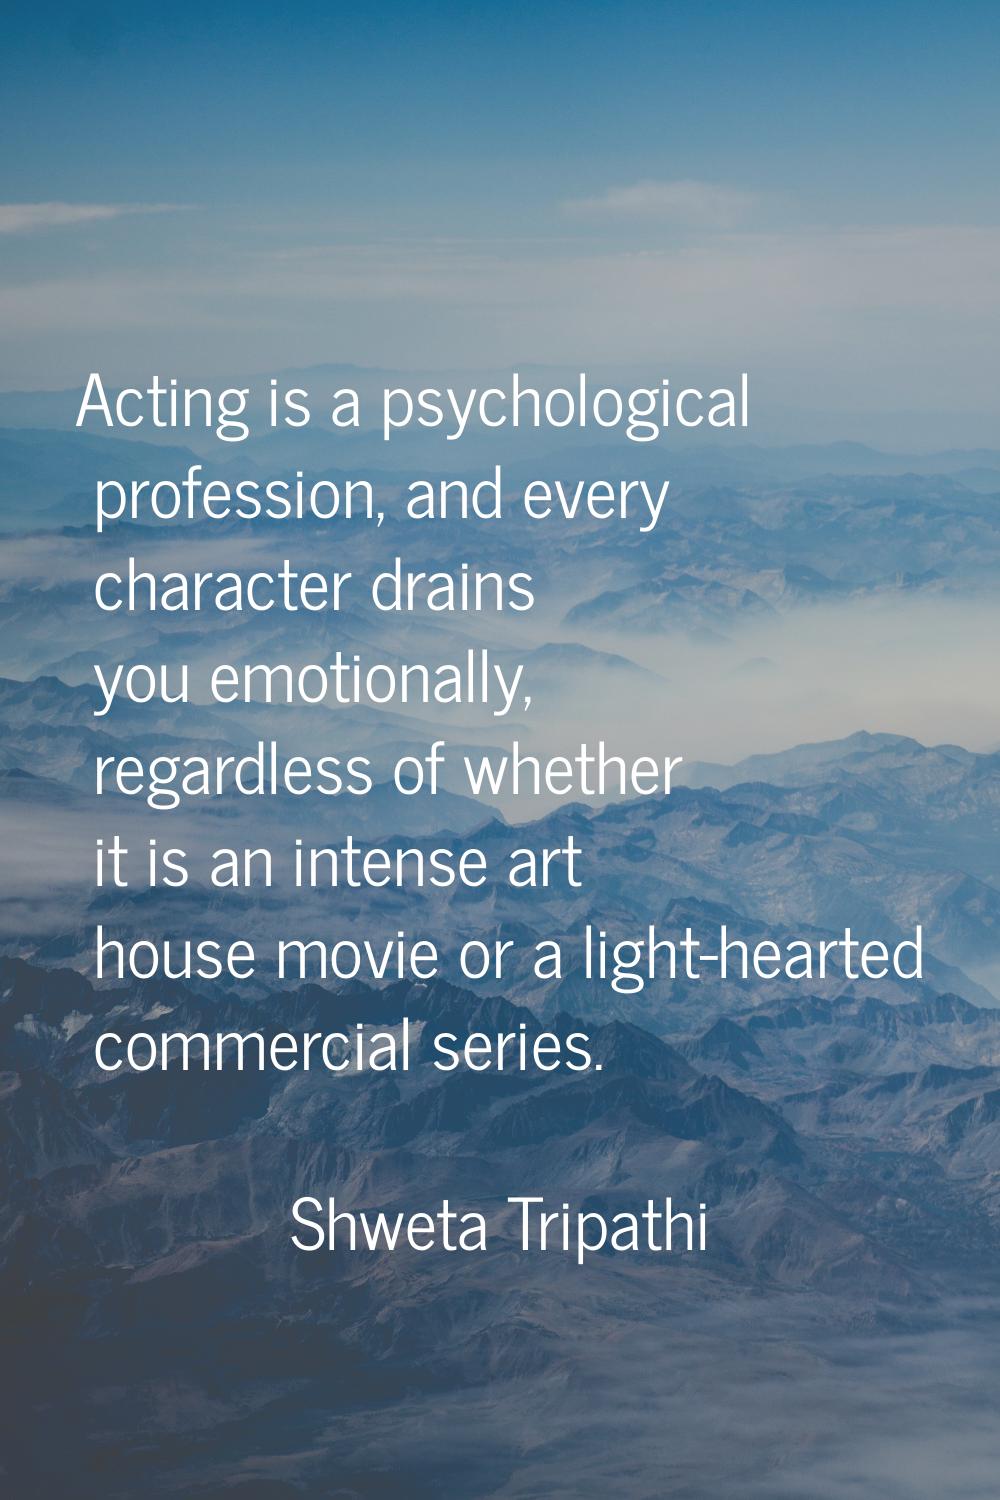 Acting is a psychological profession, and every character drains you emotionally, regardless of whe